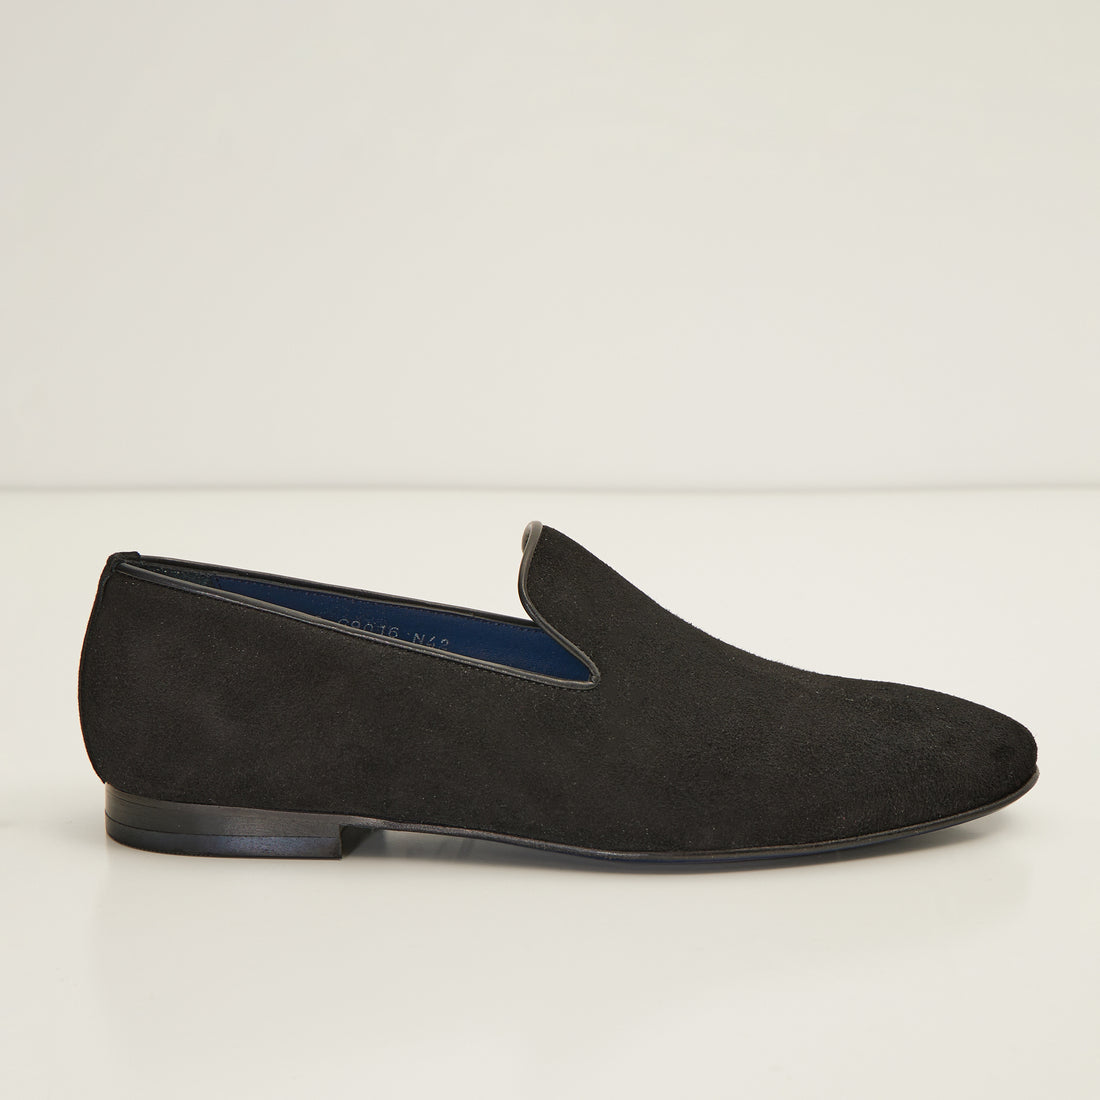 The Formal Leather Loafer - Black Suede